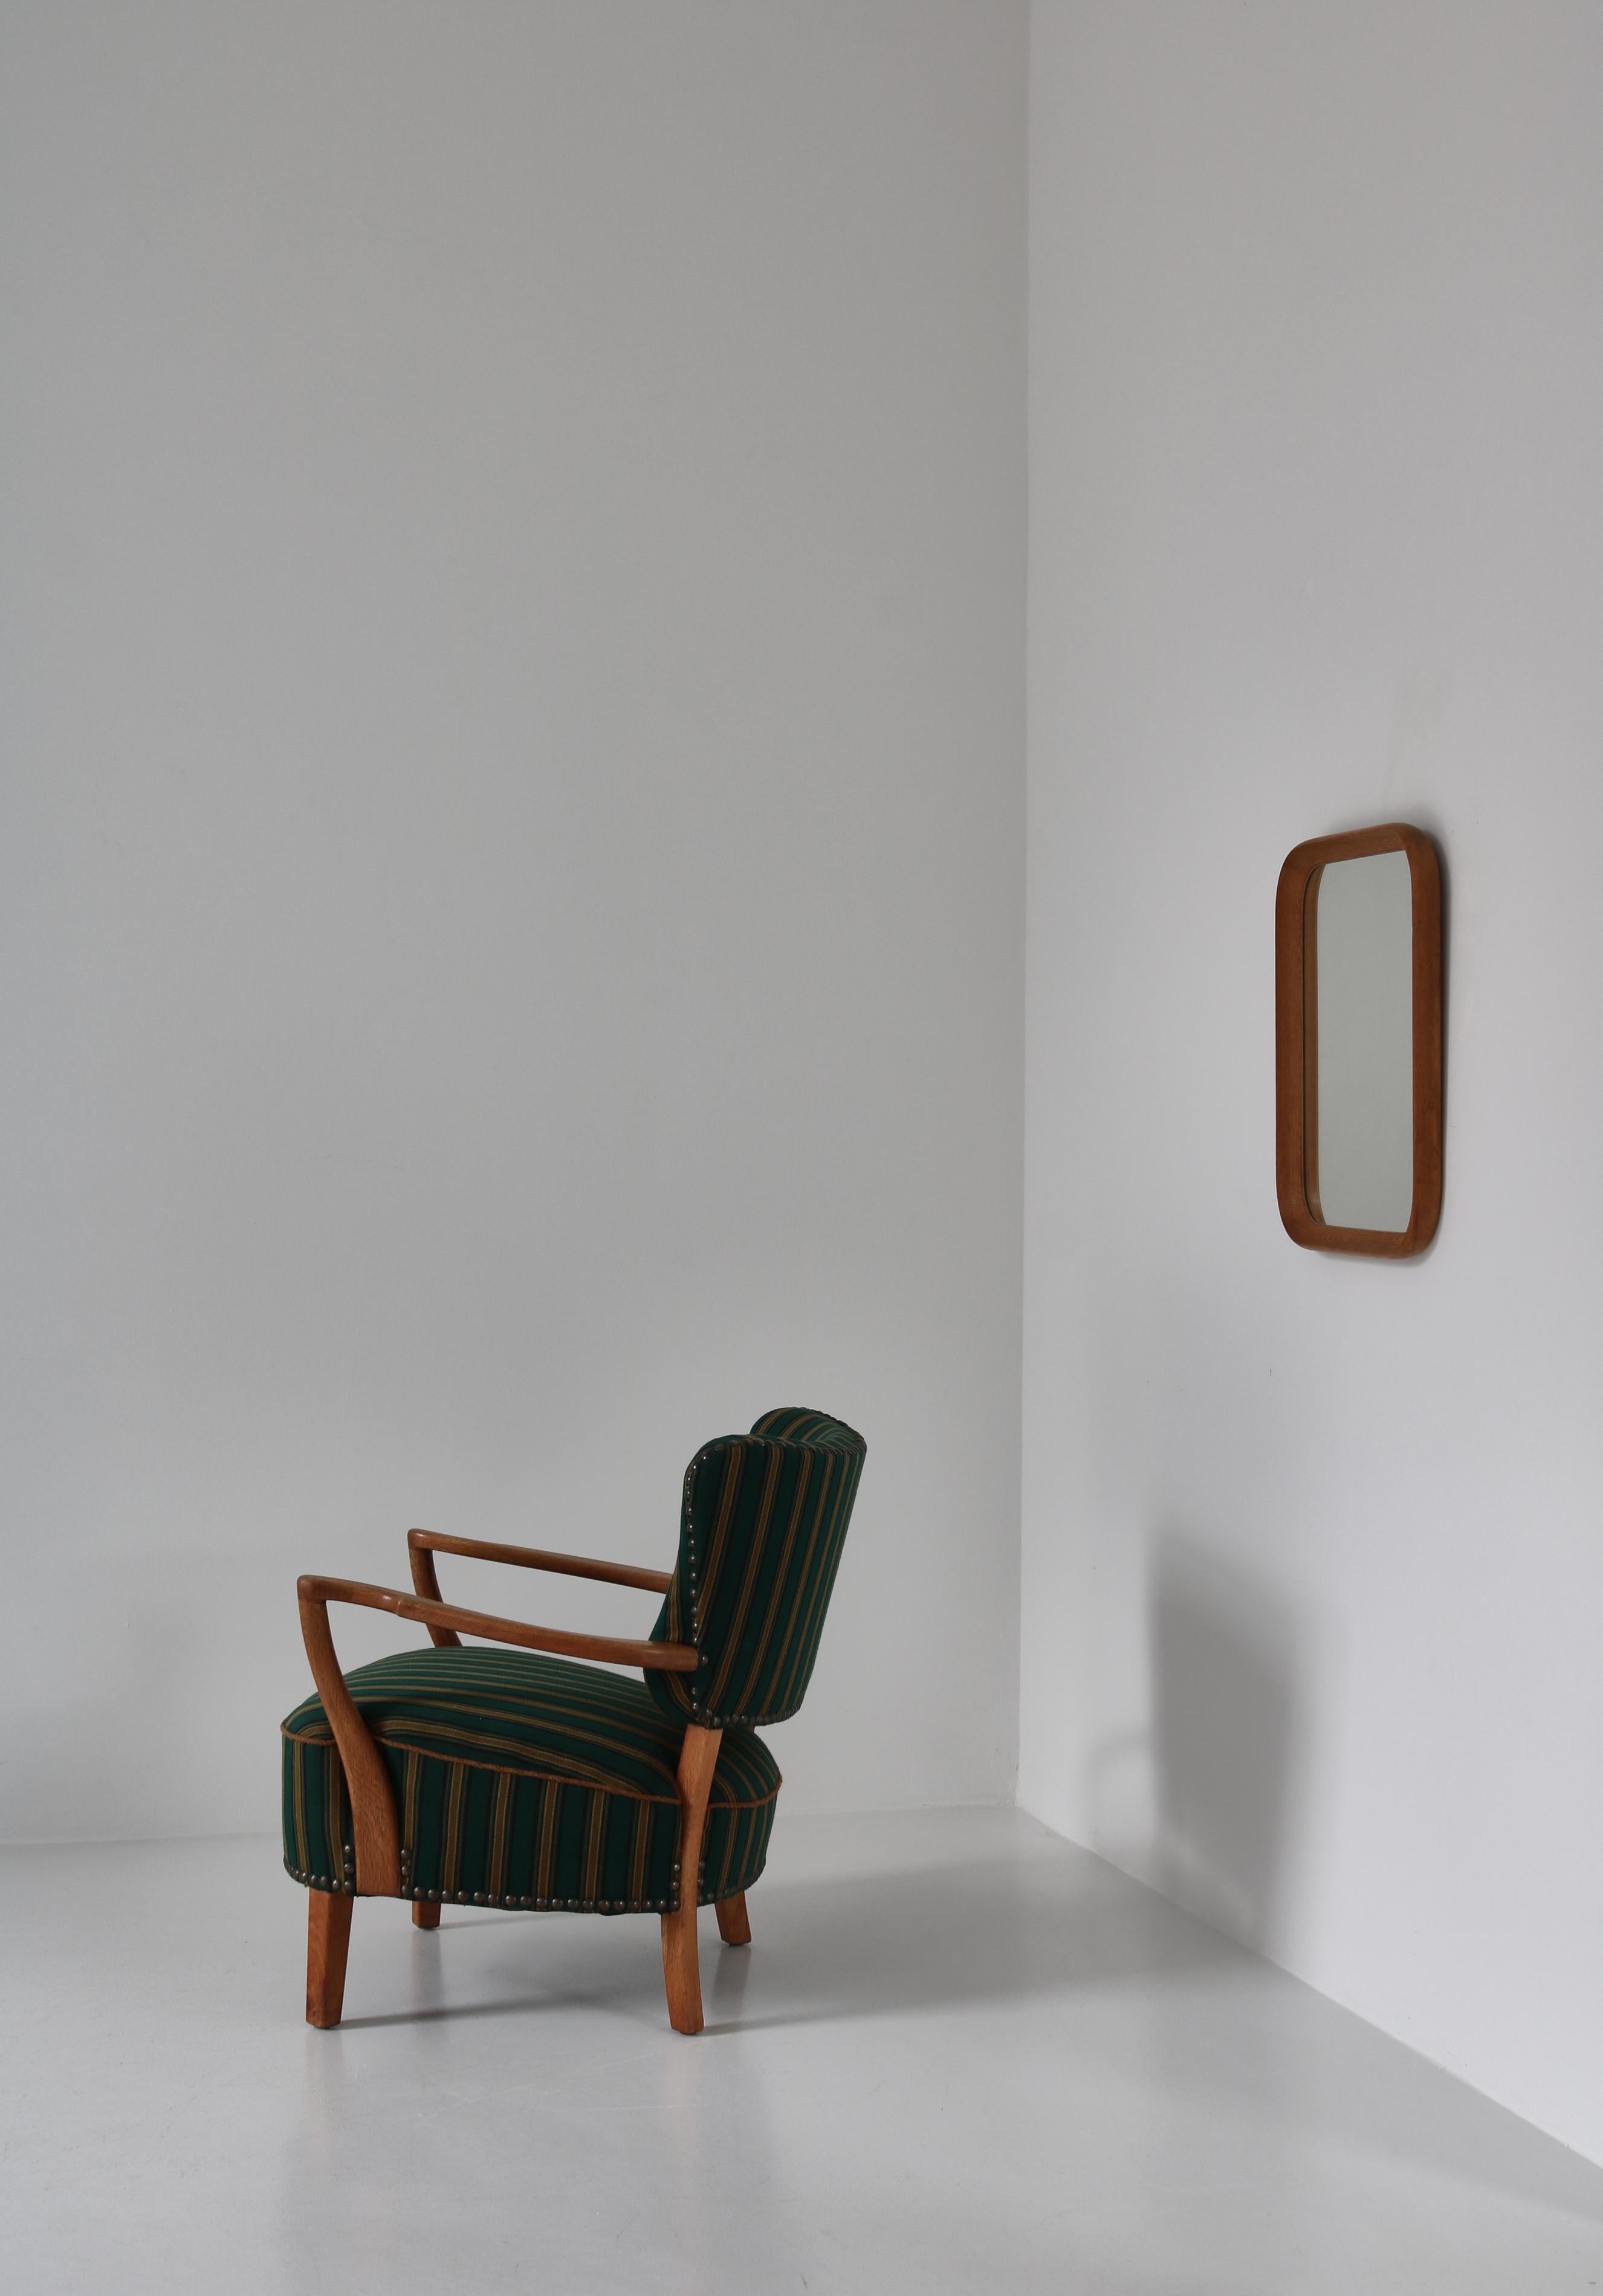 Wall mirror by a Danish cabinetmaker in the 1950s. The mirror is made of solid oakwood and is simple yet beautifully sculpted with brilliant joinery technique. In the style of Hans J. Wegner.